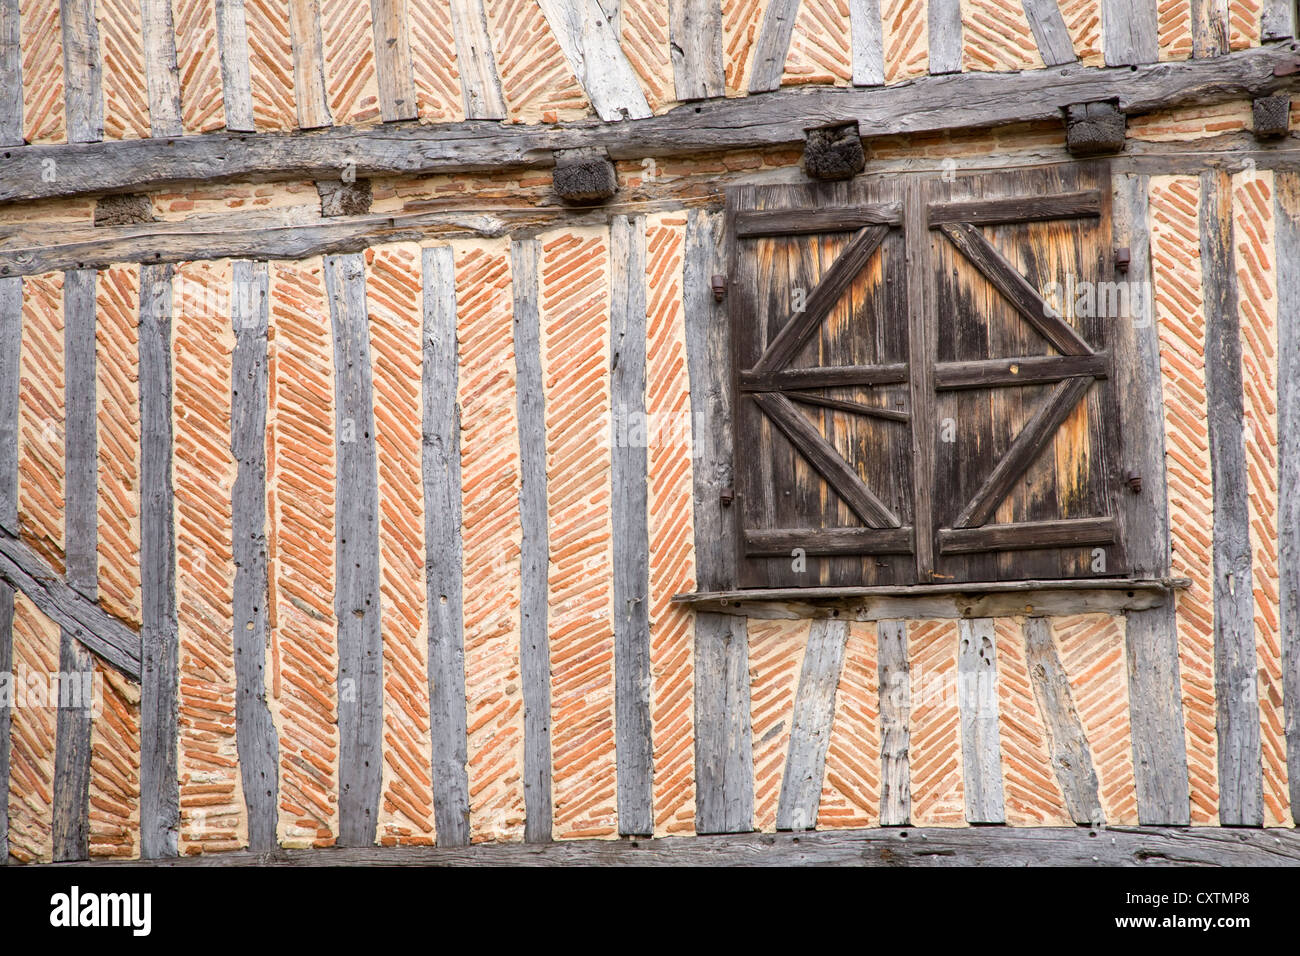 Half-timbered house in Bergerac, Dordogne, France Stock Photo